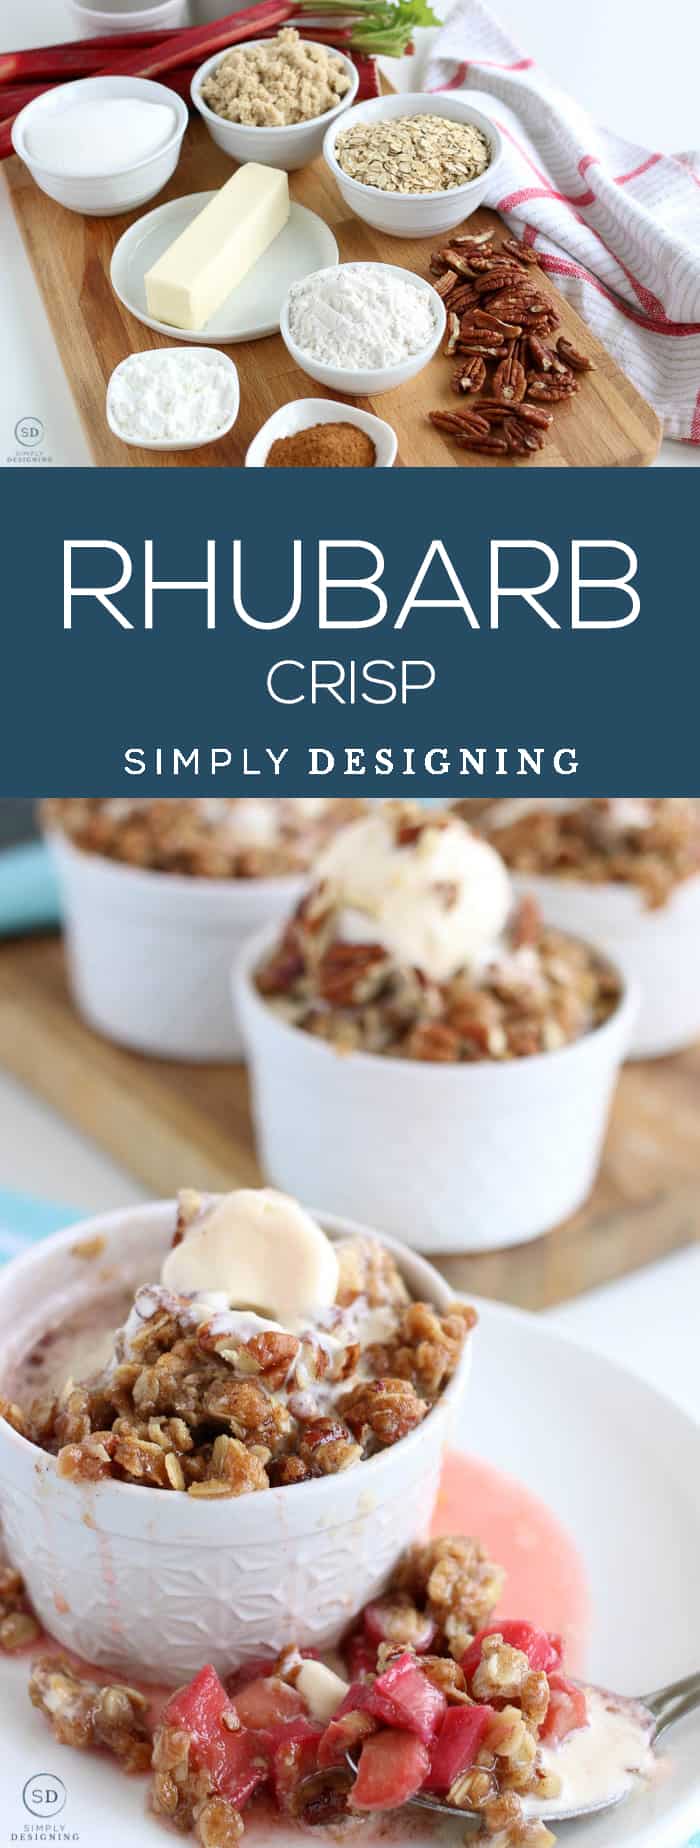 Rhubarb Crisp - This rhubarb crisp recipe is delicious forgiving and so simple - You can even adapt these into a rhubarb crisp bars recipe